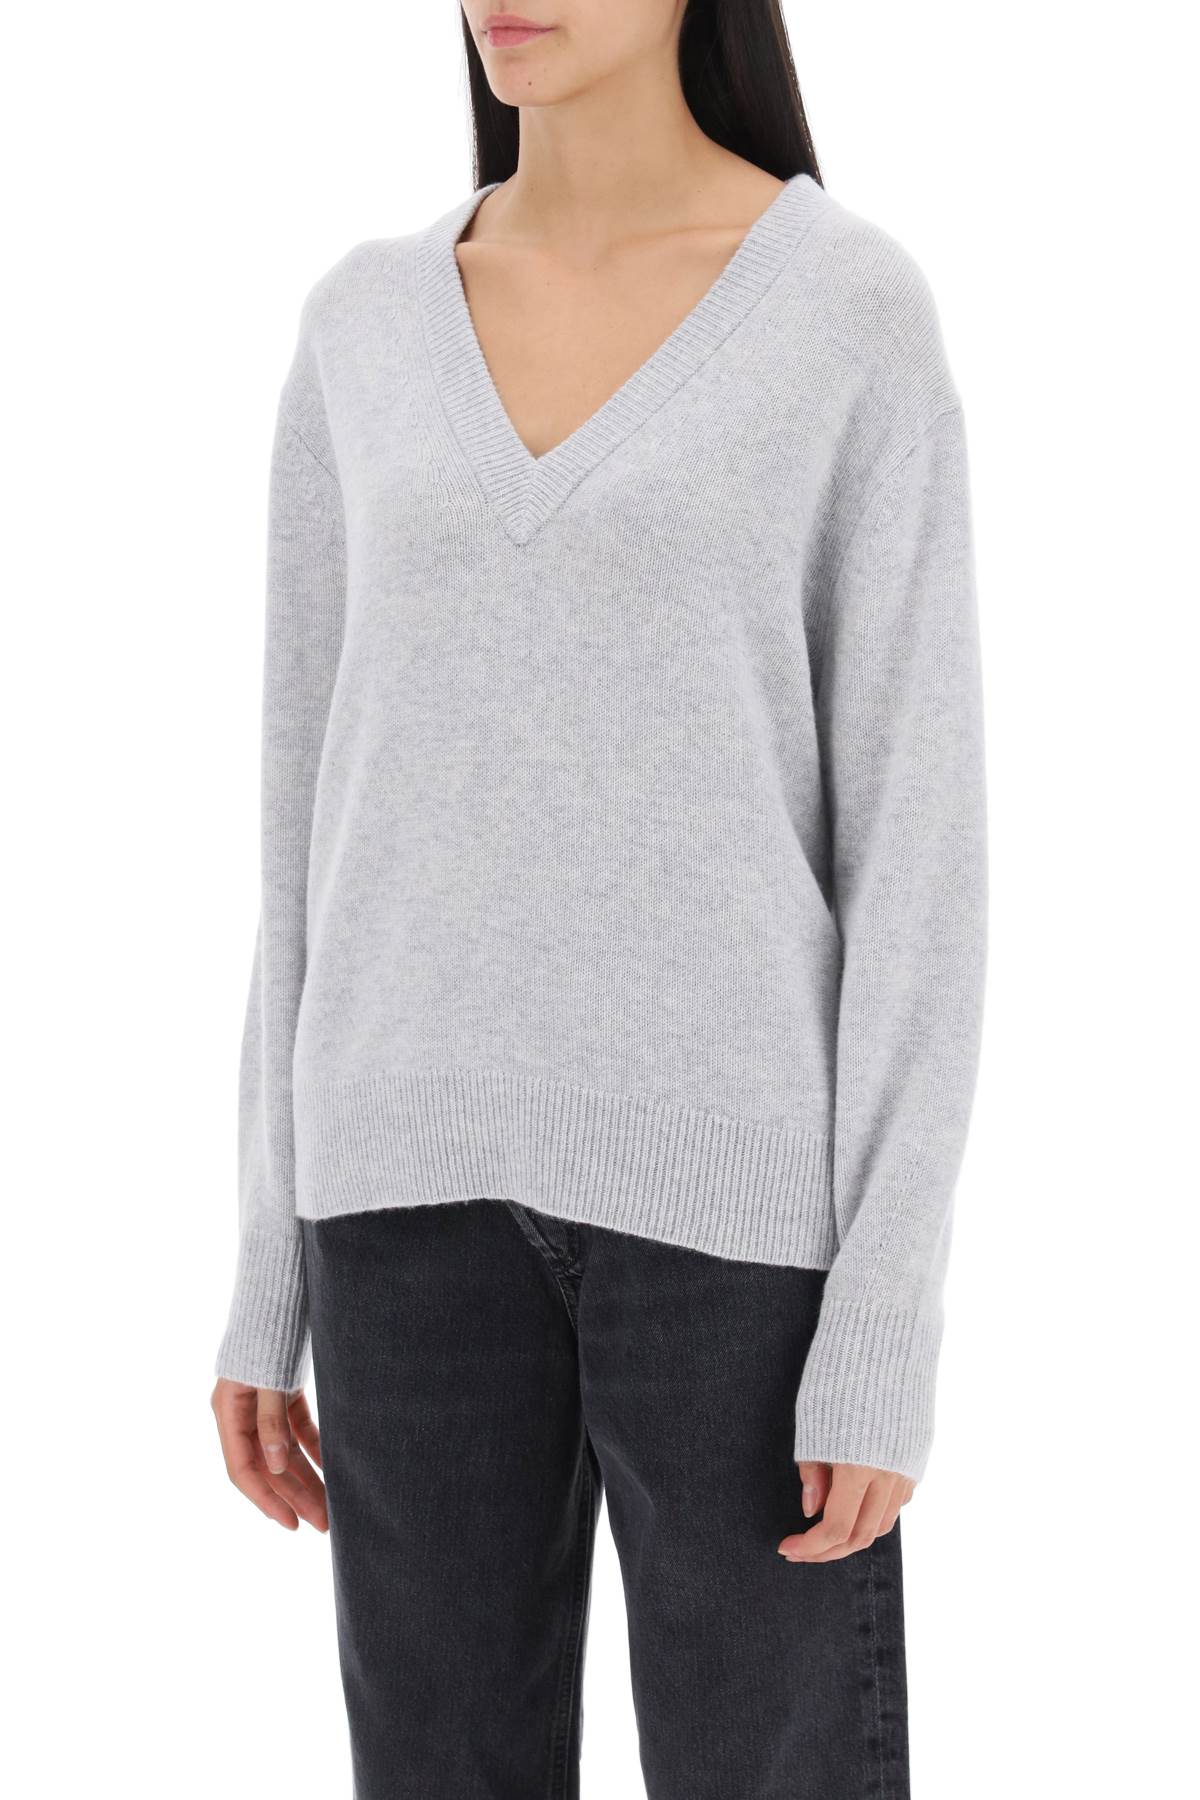 Guest in residence the v cashmere sweater-3